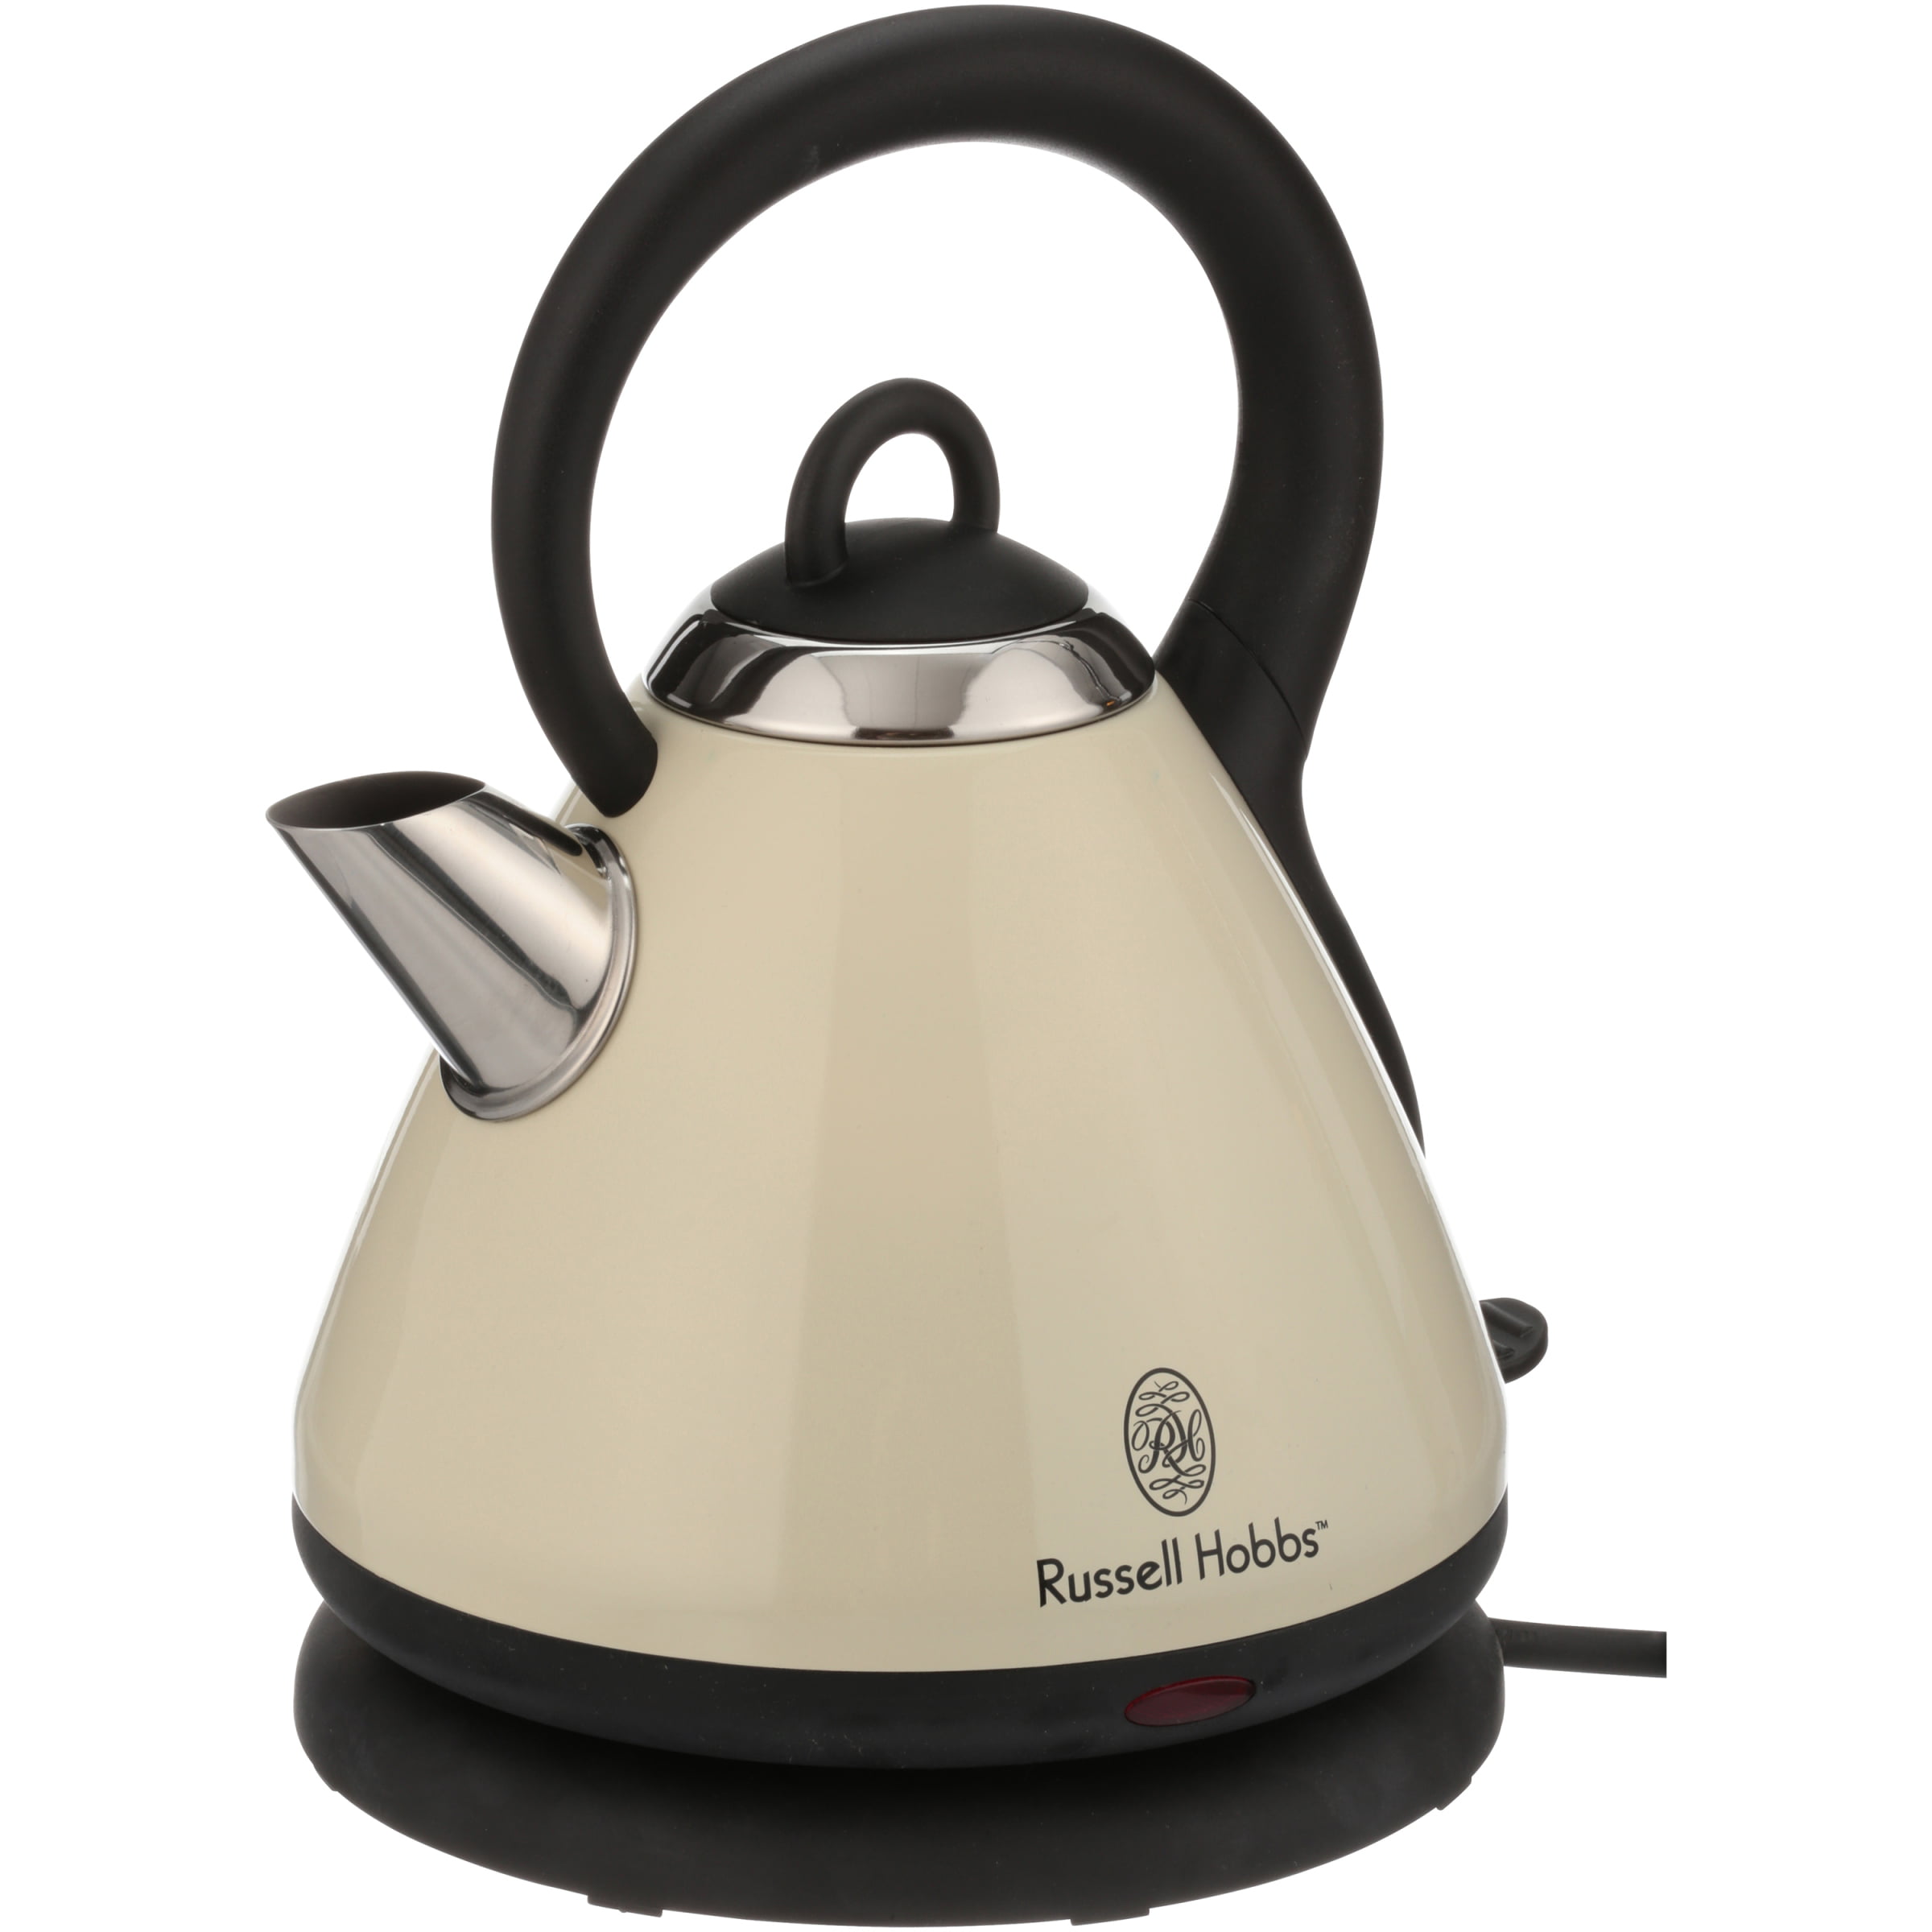 Russell Hobbs 1.8L Stainless Steel 